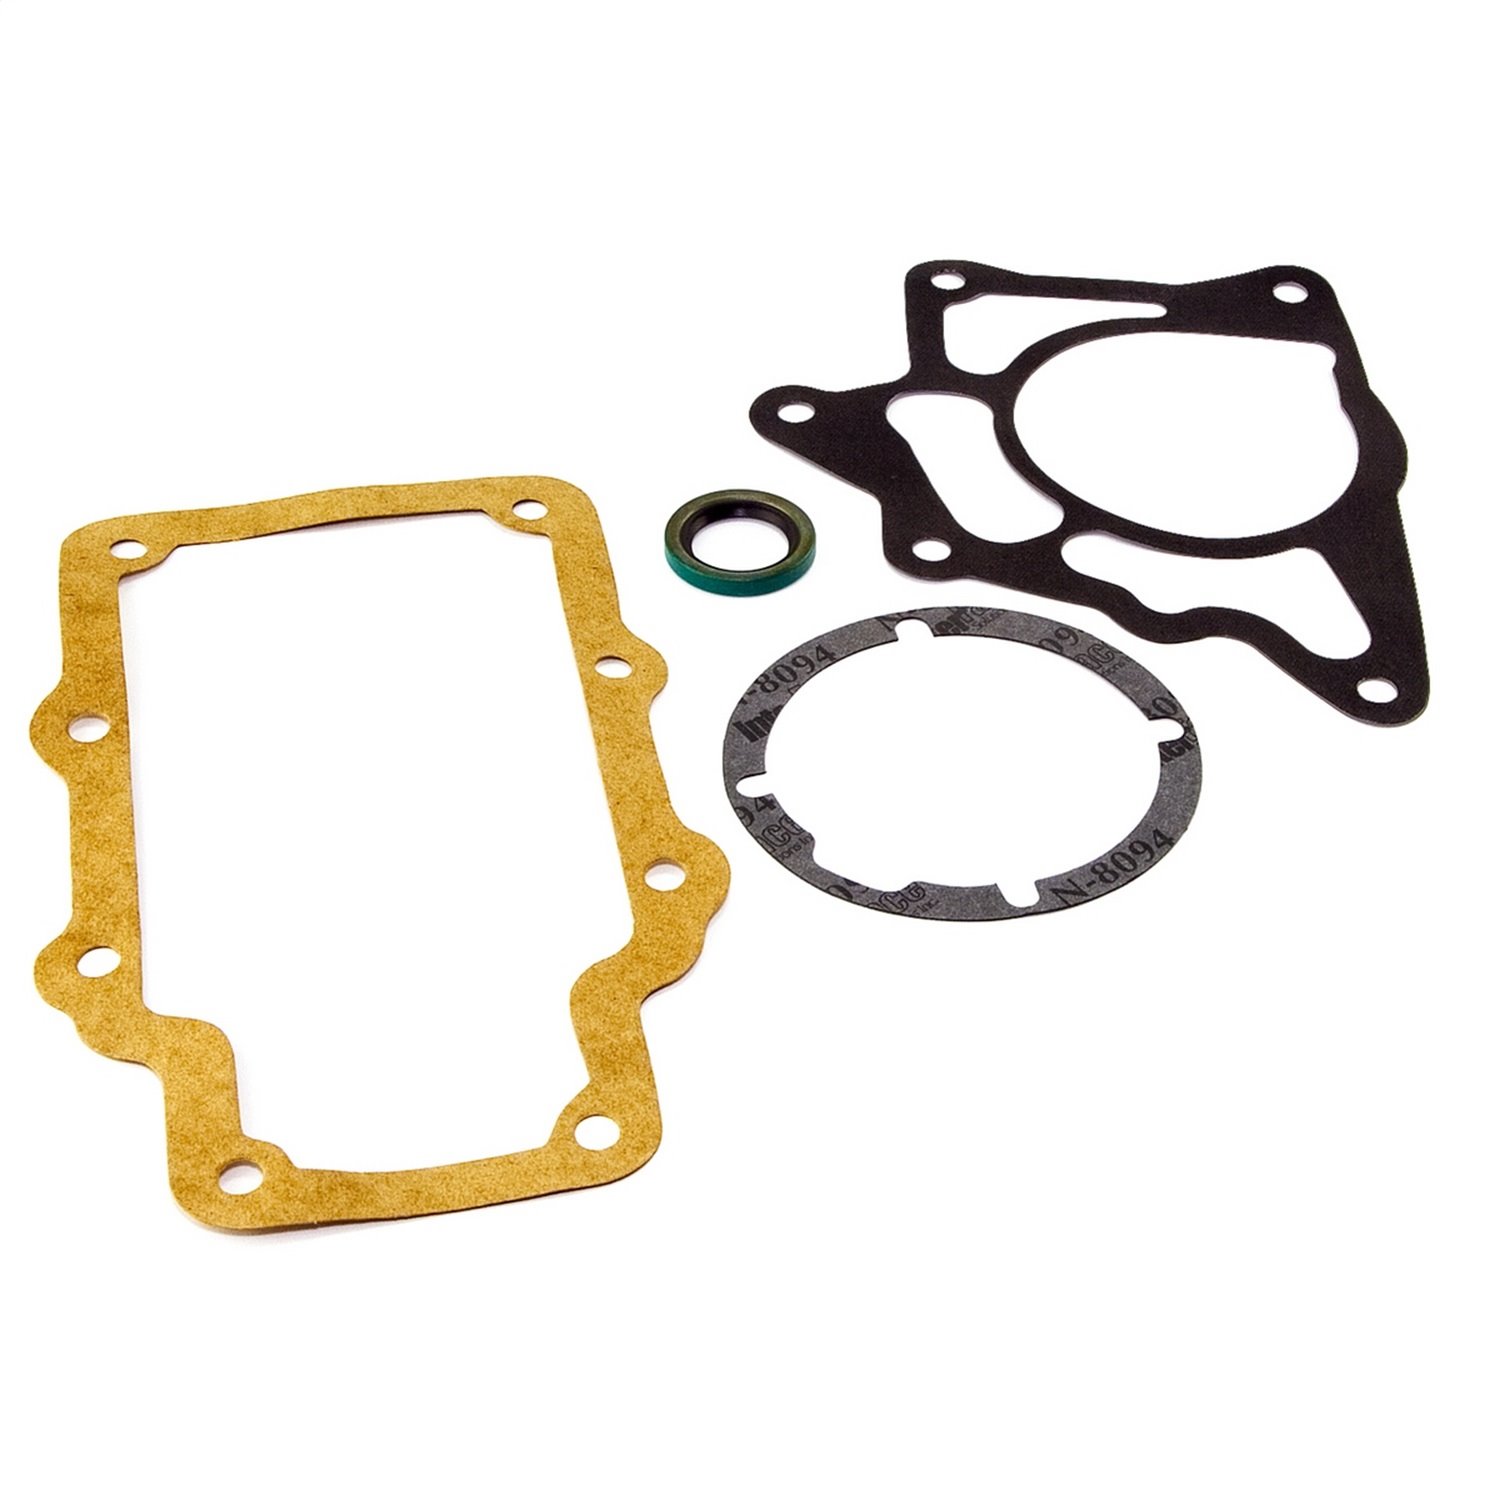 This 3-speed manual transmission seal kit from Omix-ADA fits 71-75 Jeep vehicles with the Warner T15 transmission.